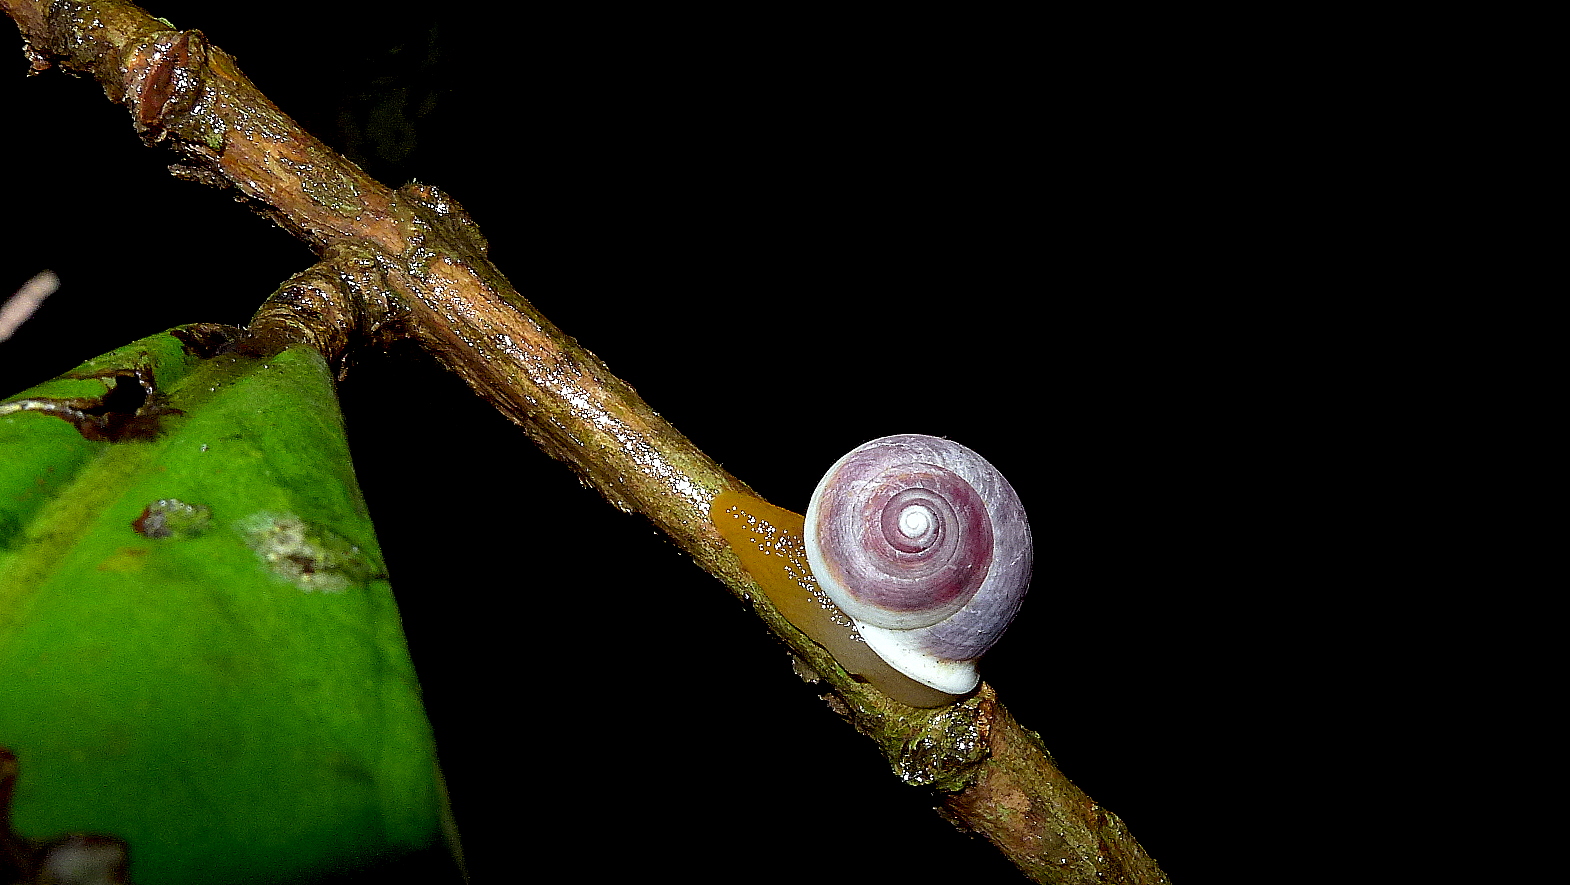 the shell of a snail is seen from the underside of a leaf